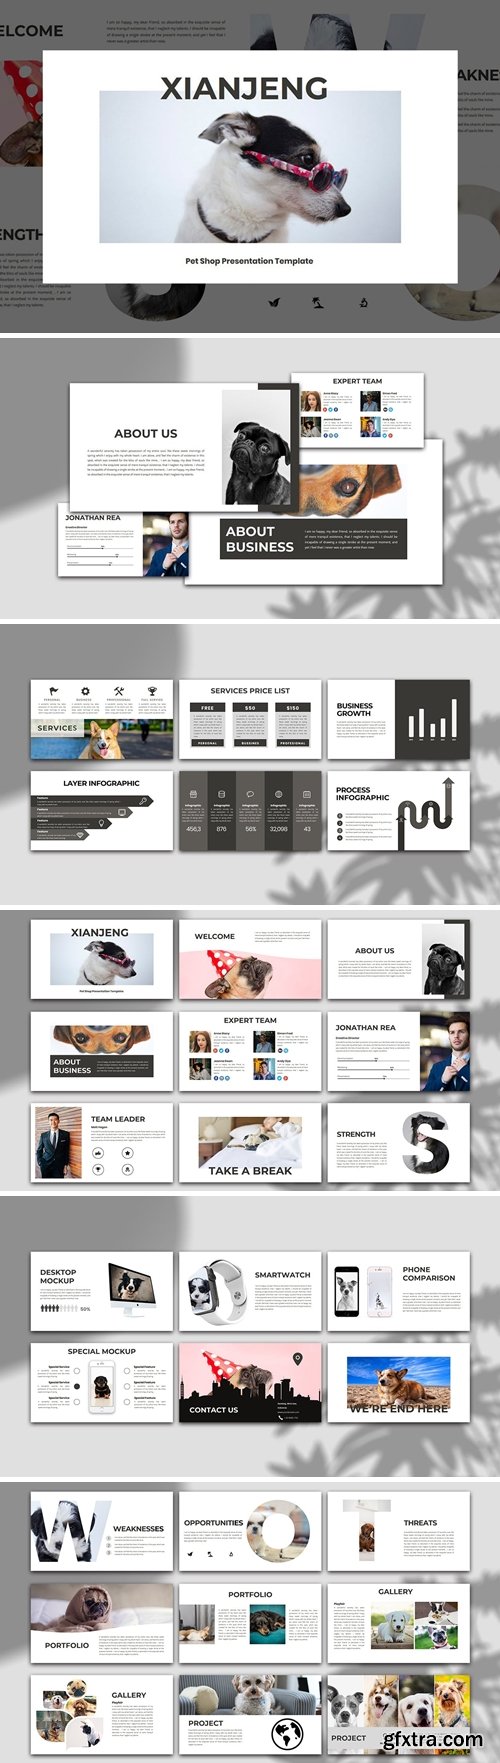 XIANJING – Pet Shop Powerpoint, Keynote and Google Slides Templates